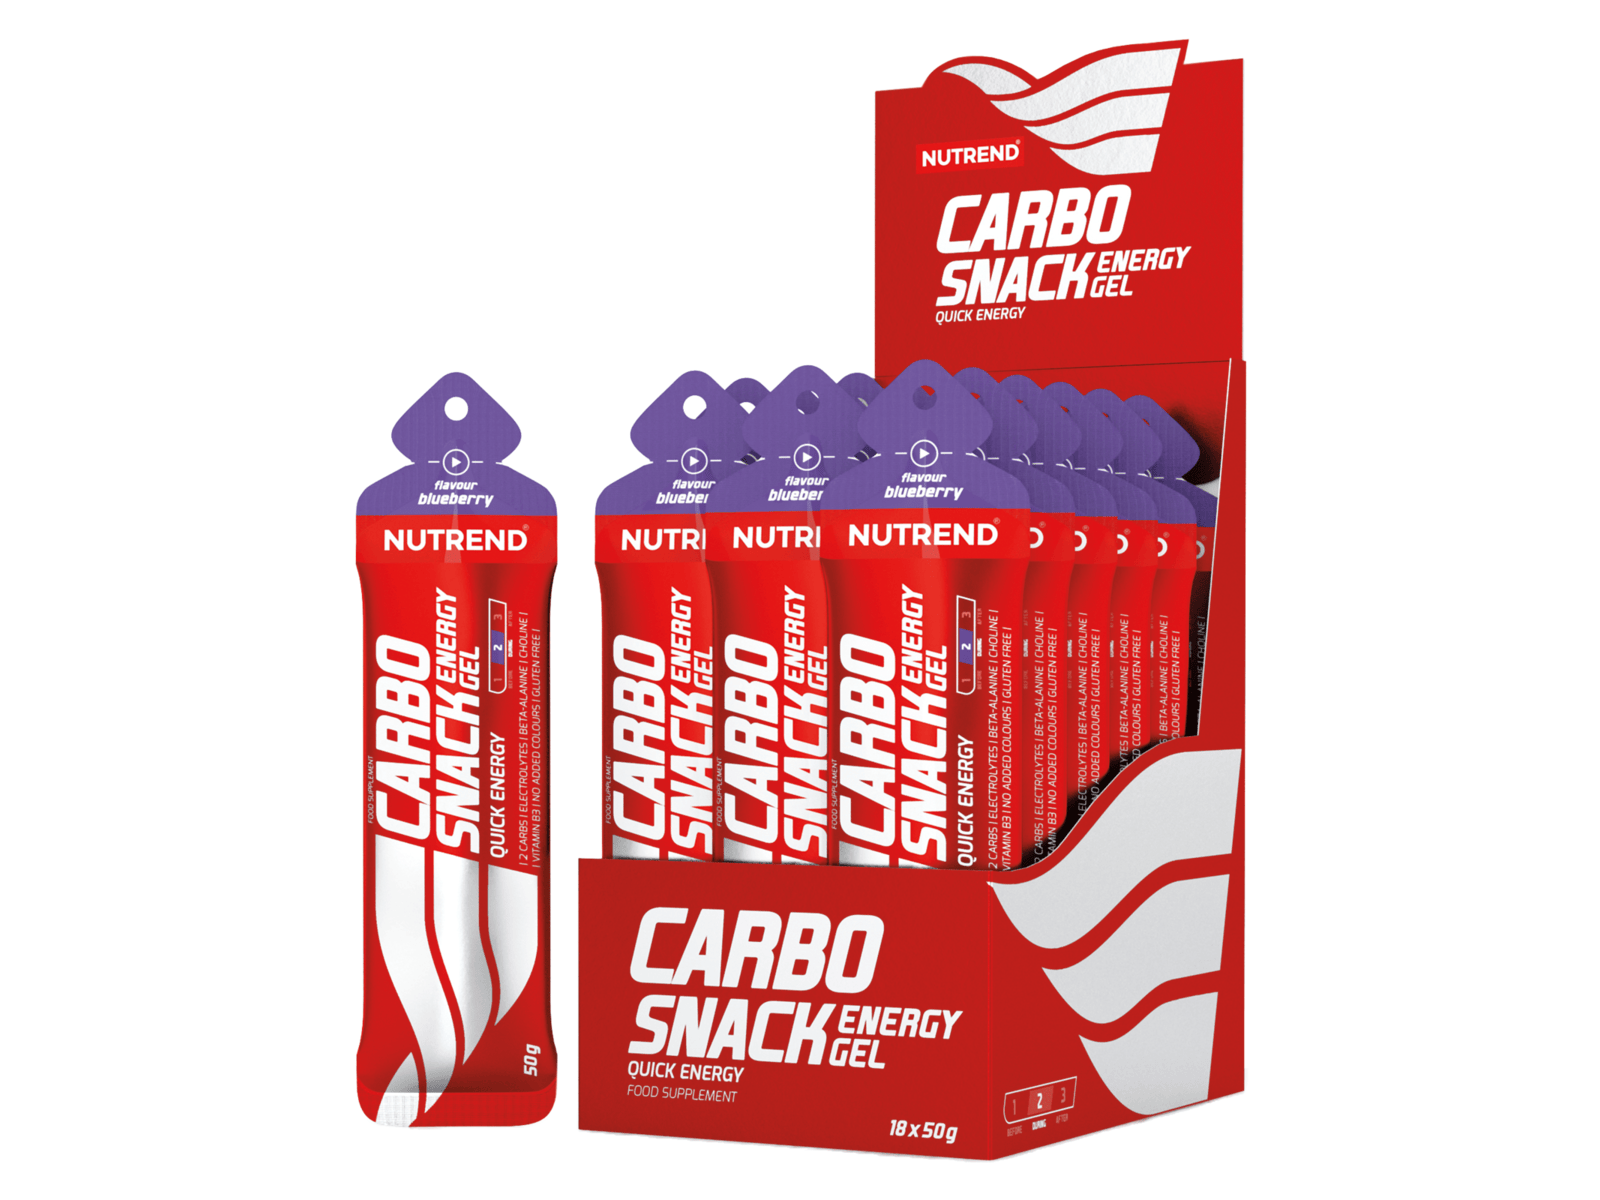 Carbosnack Sachets (Blueberry - 18 x 50 gram) - NUTREND